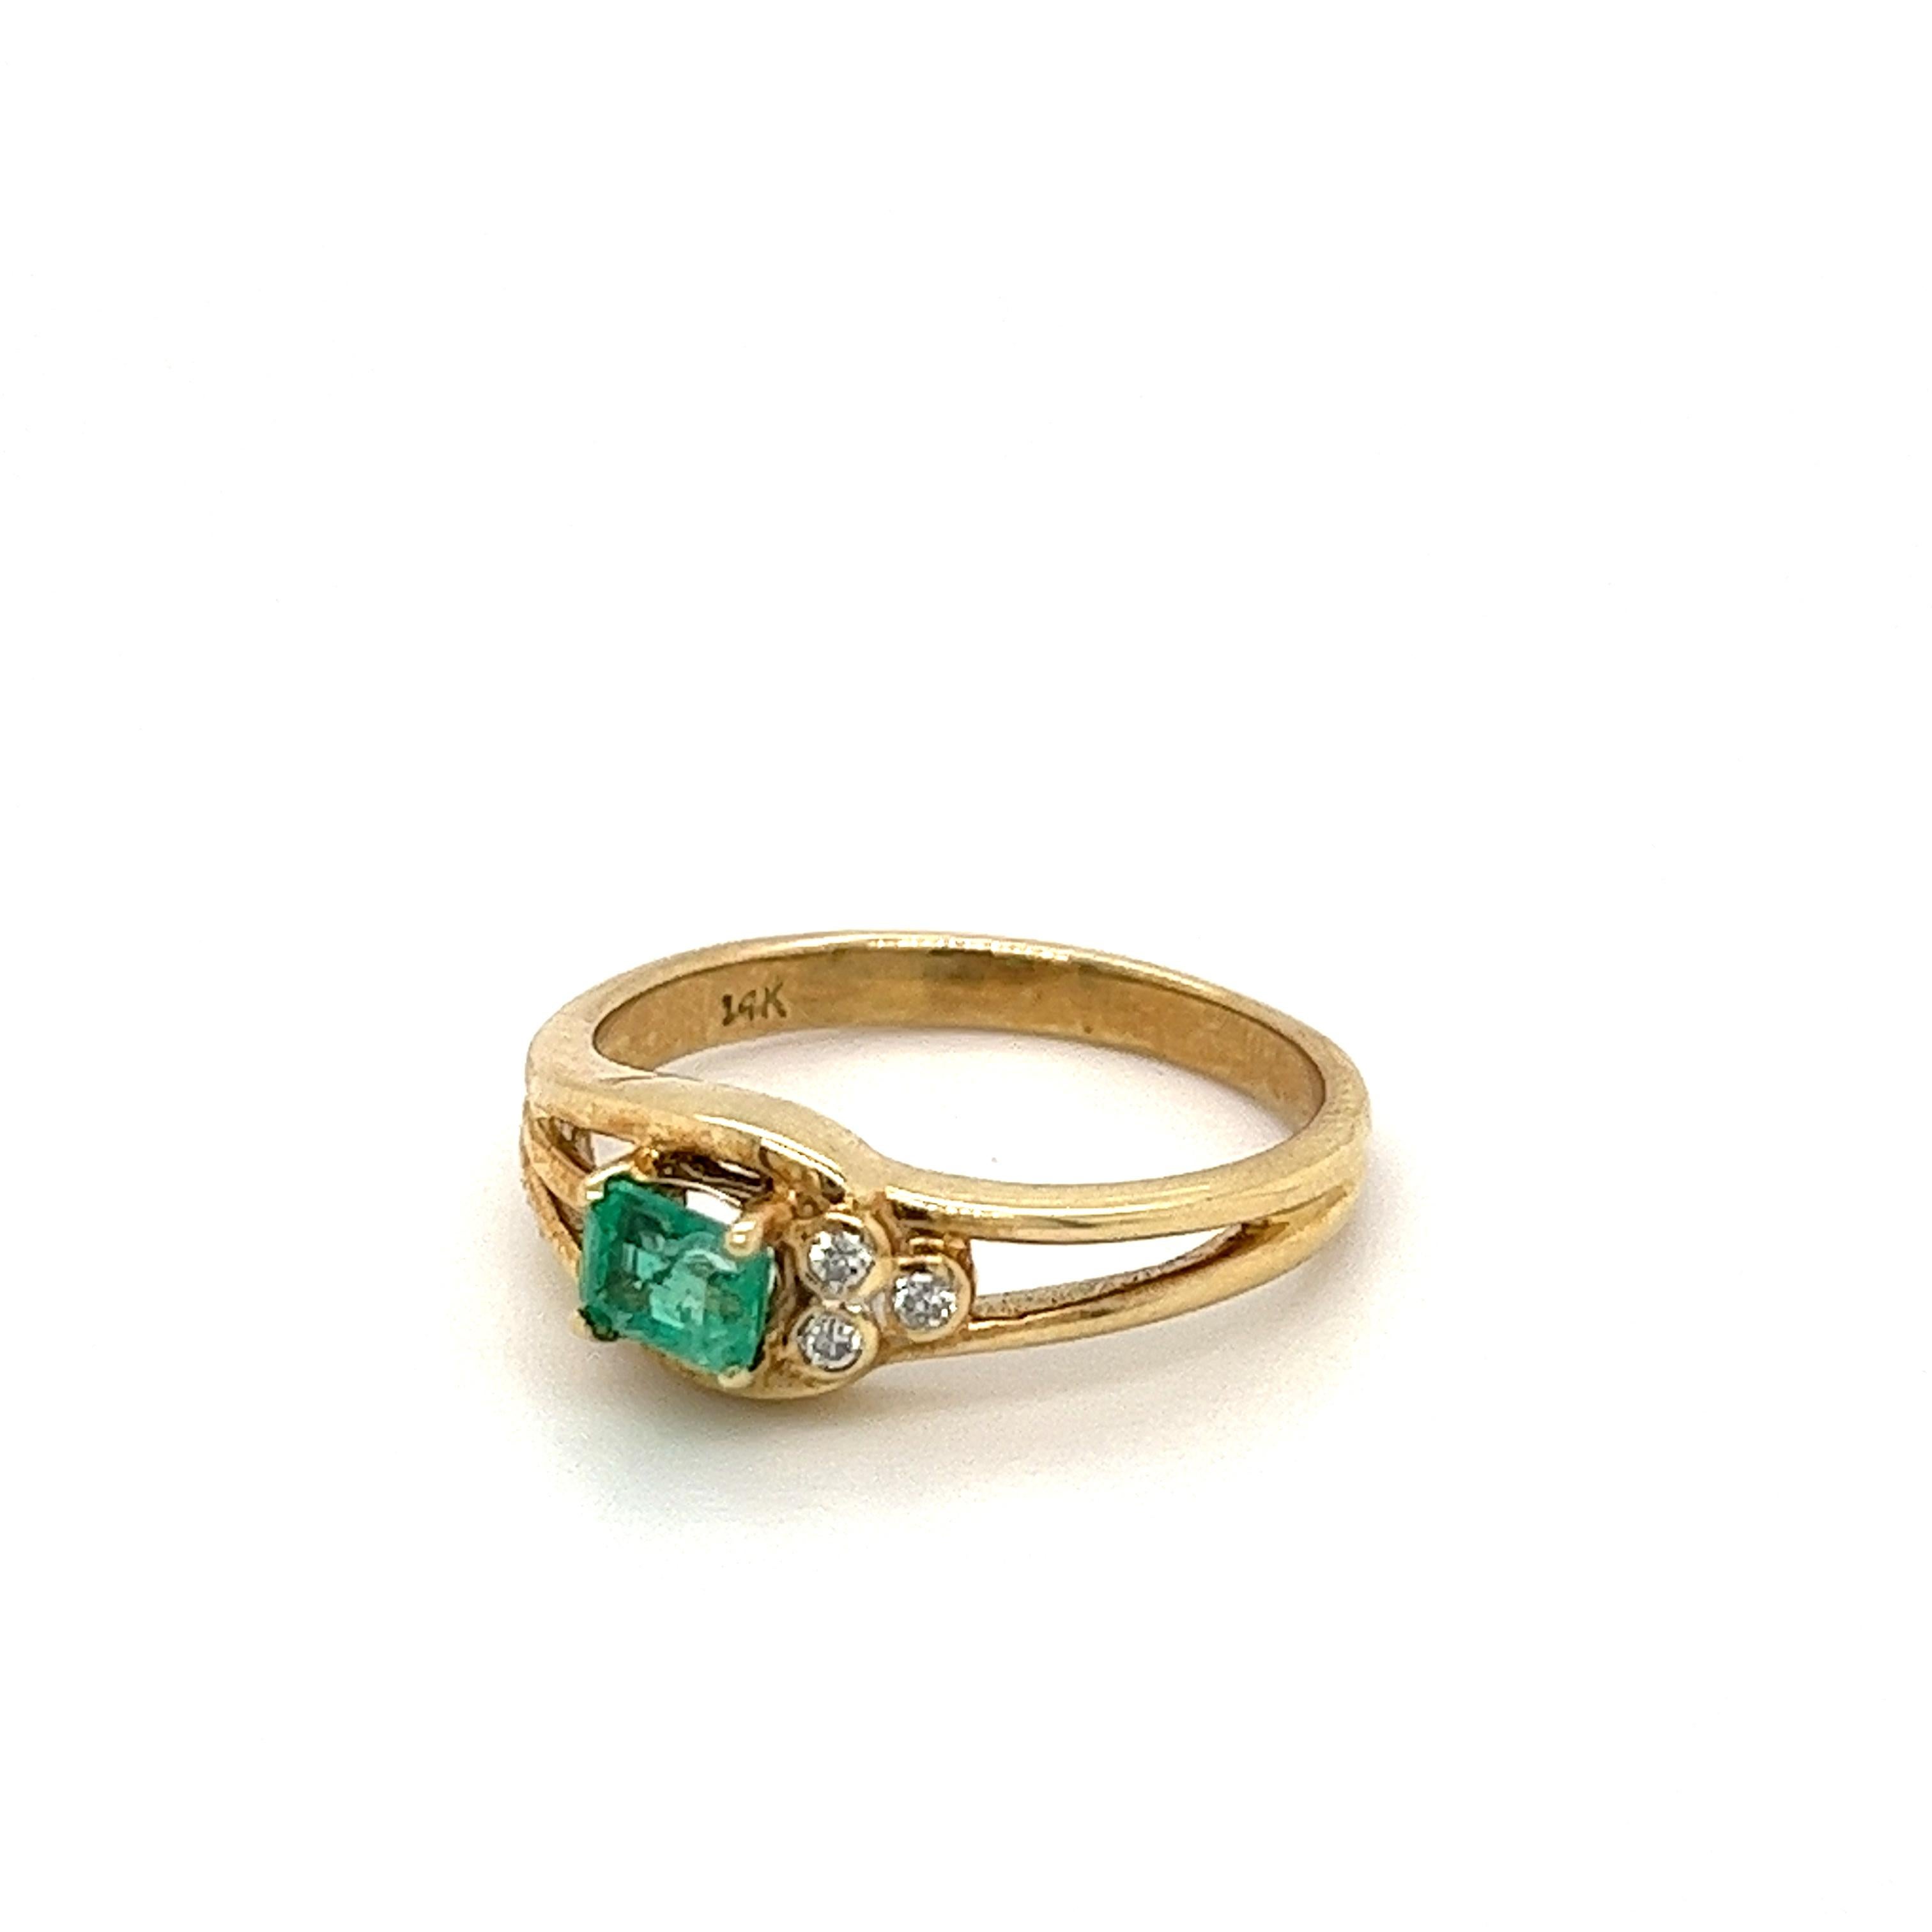 Emerald Cut Natural Colombian Emerald in 18k Yellow Gold Thin Band Ring